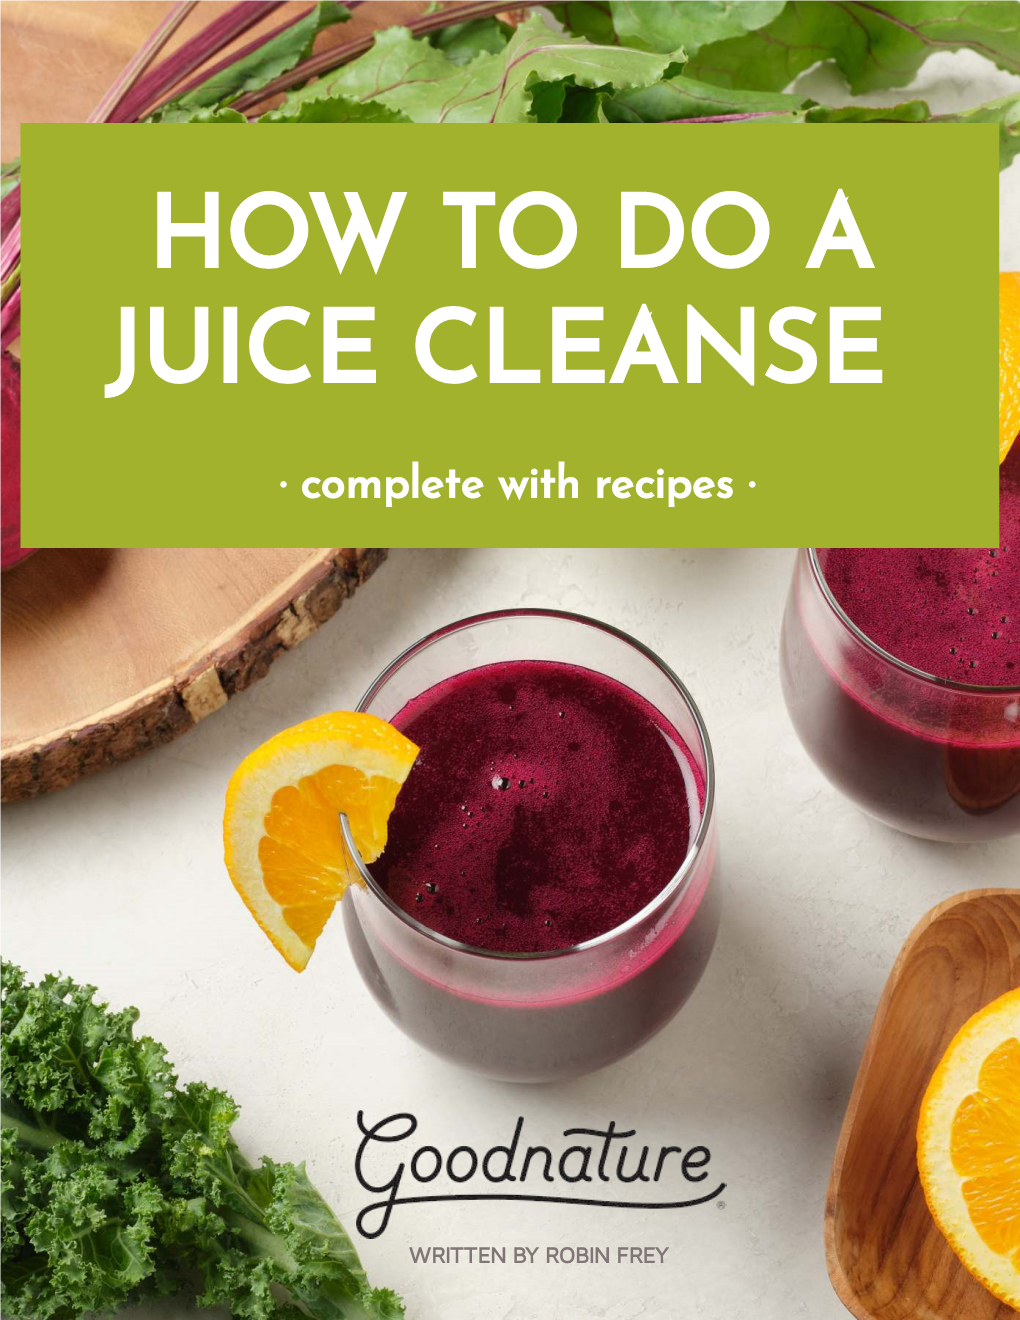 How to Do a Juice Cleanse Guide